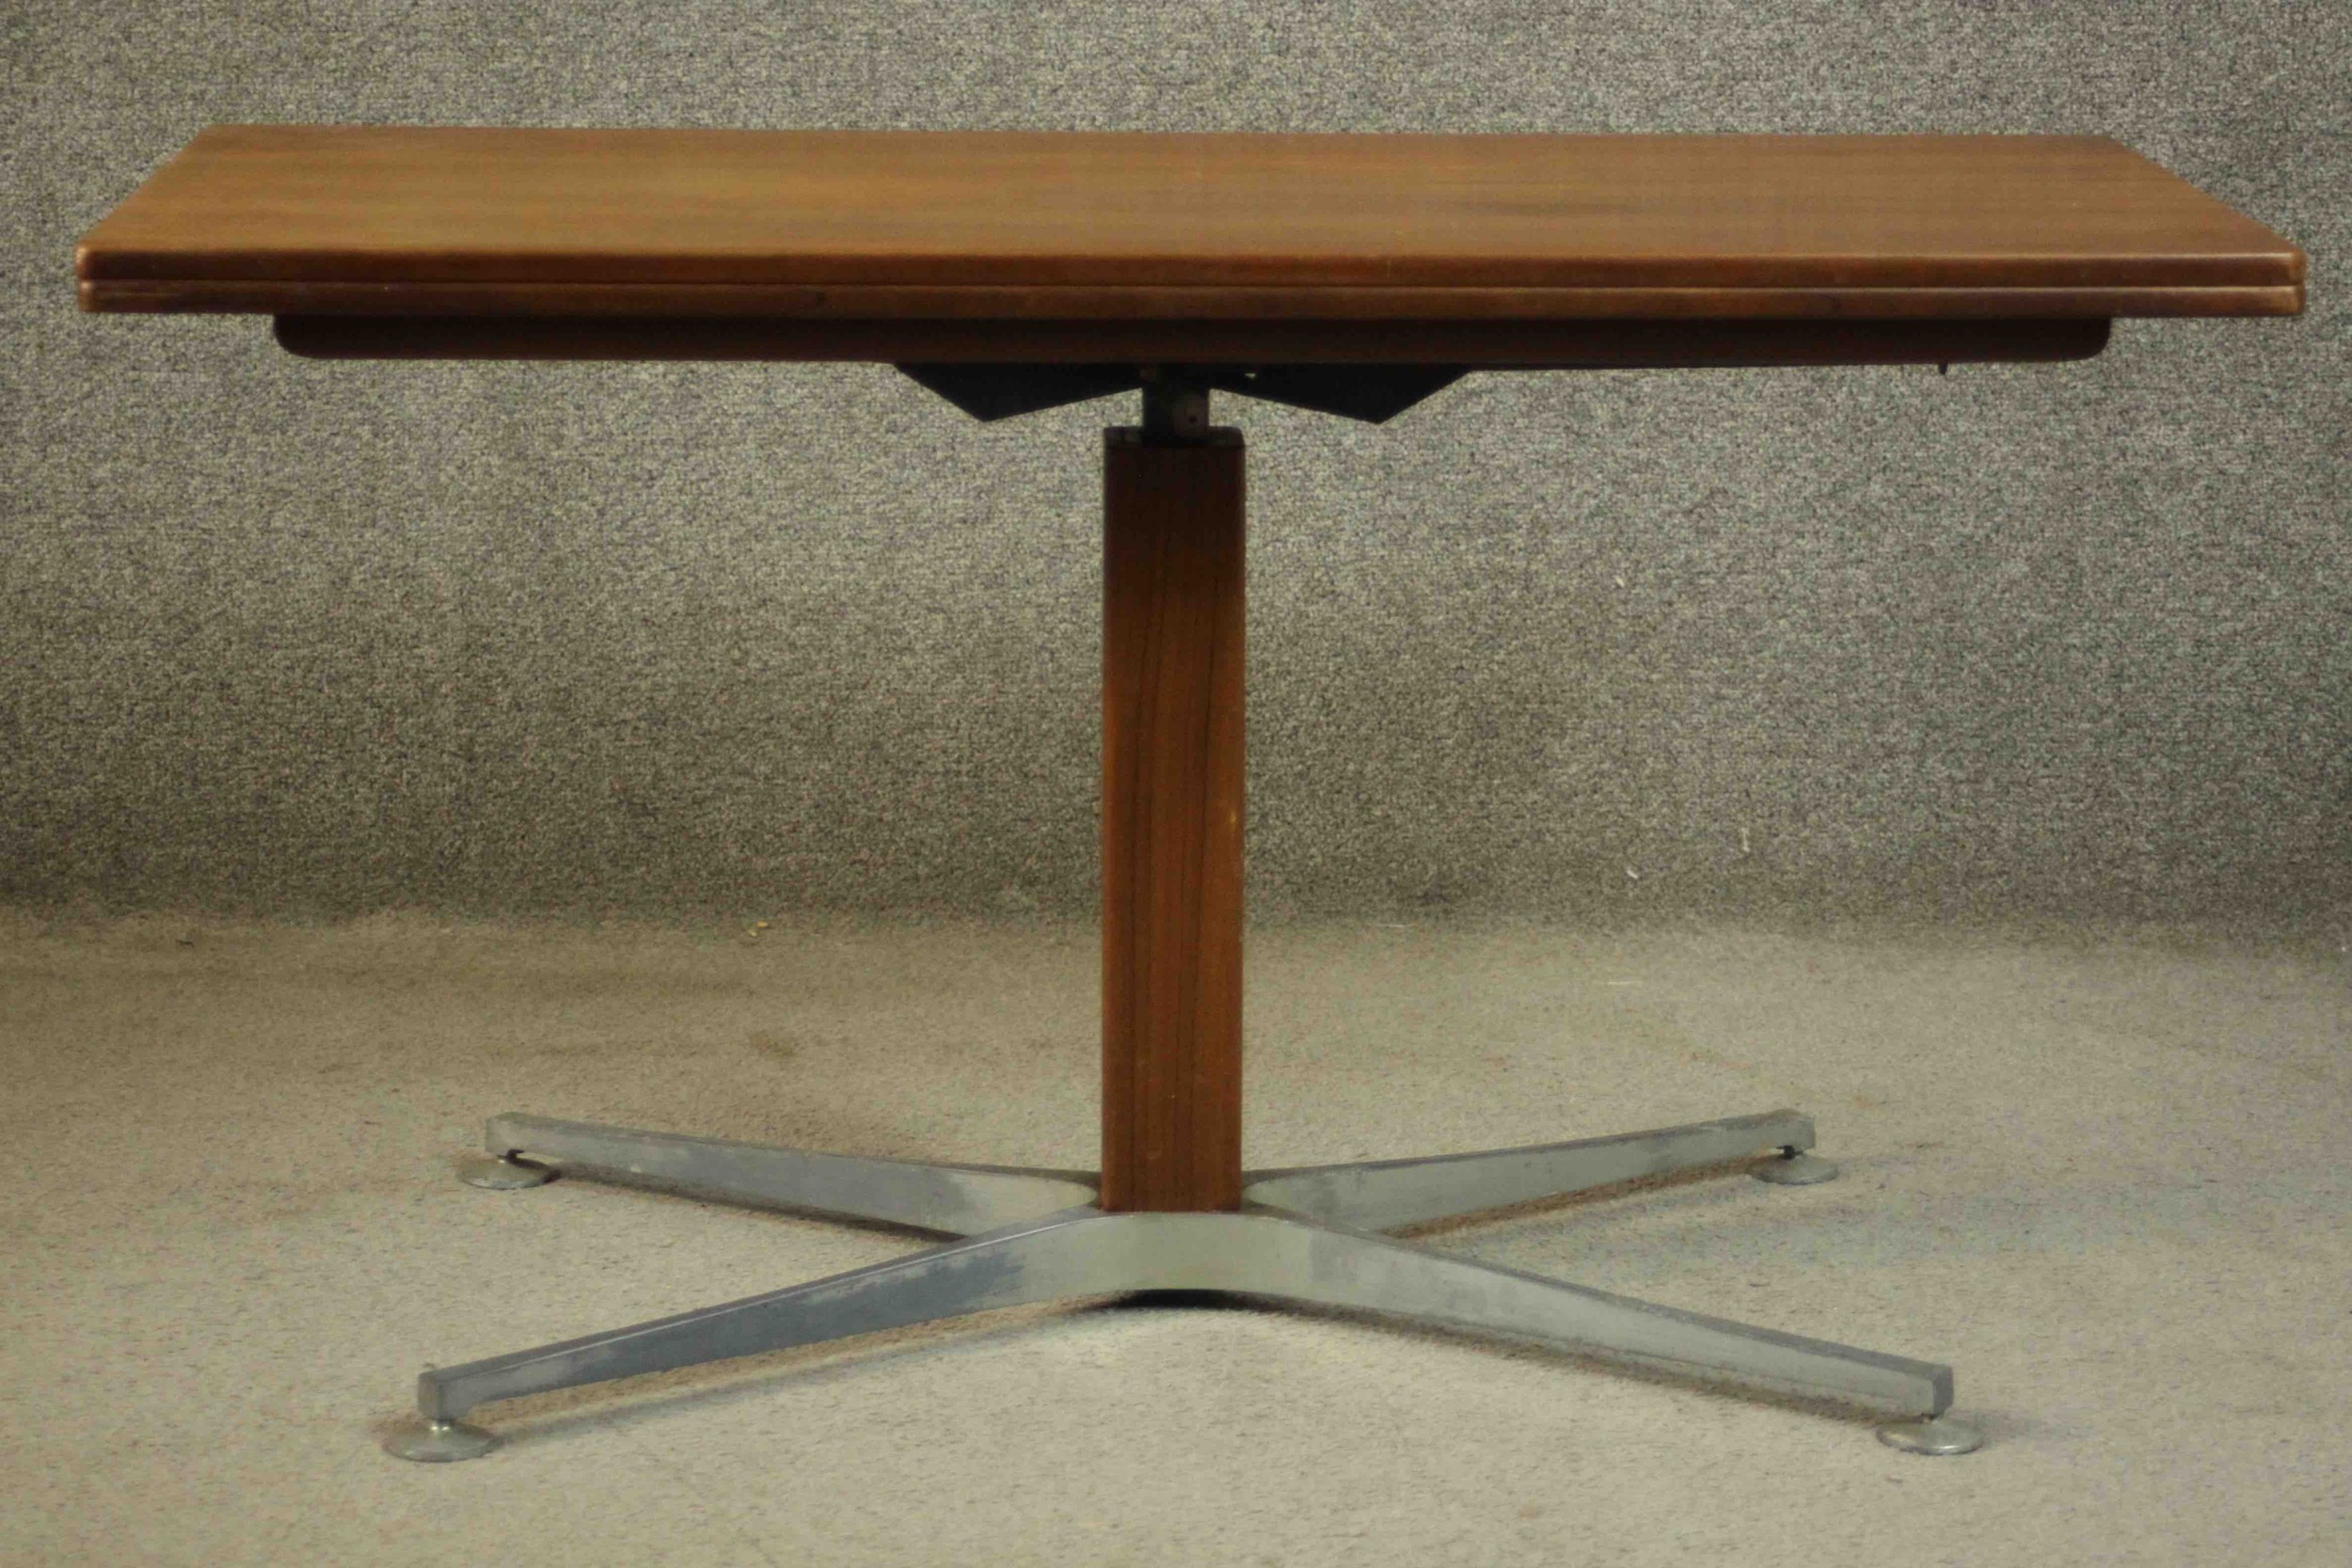 A vintage teak fold over console table converting to dining table with height adjustable mechanism - Image 3 of 8